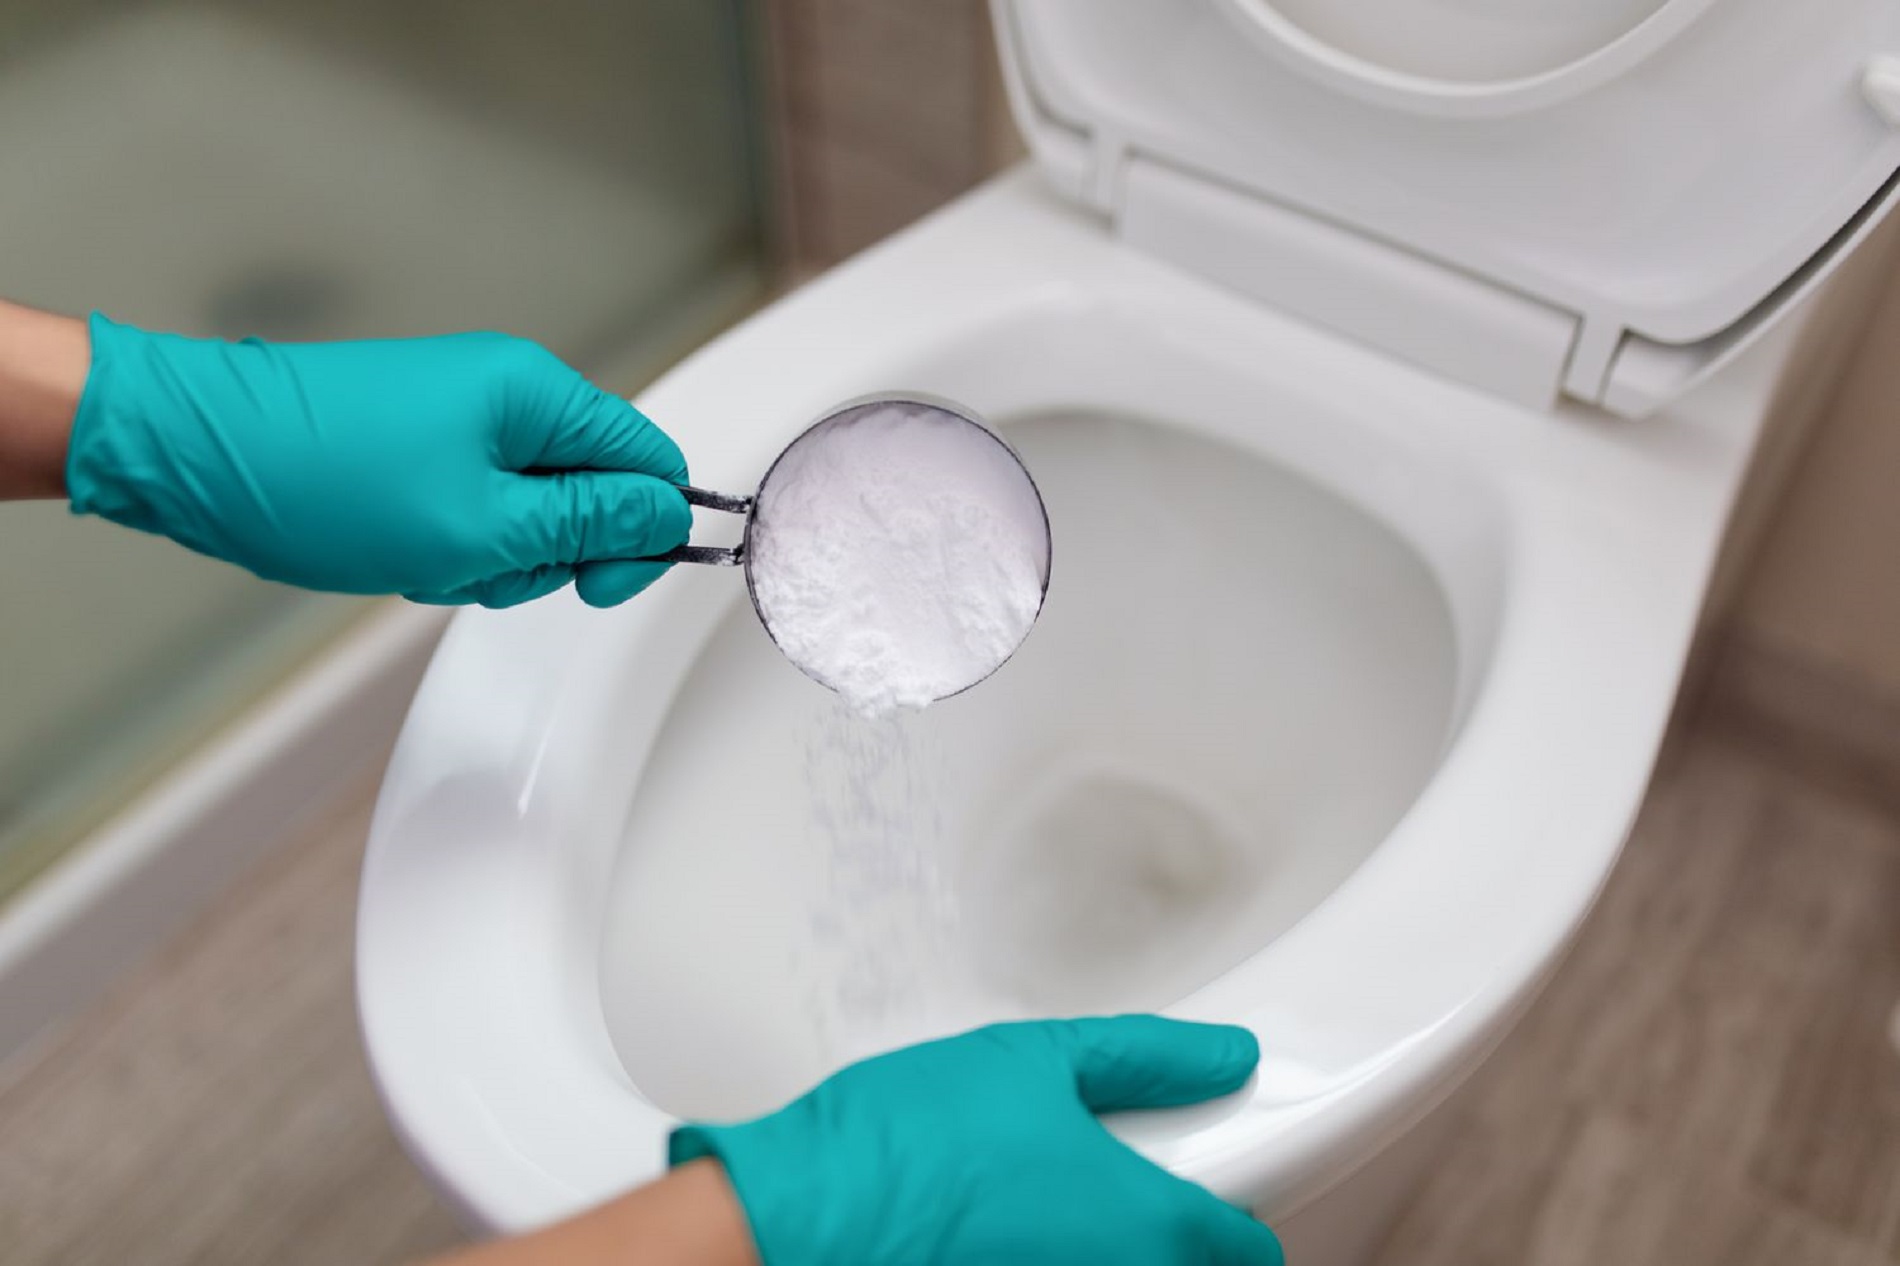 How to remove toilet limescale: 10p cleaning staple breaks down limescale  in minutes | The Sun